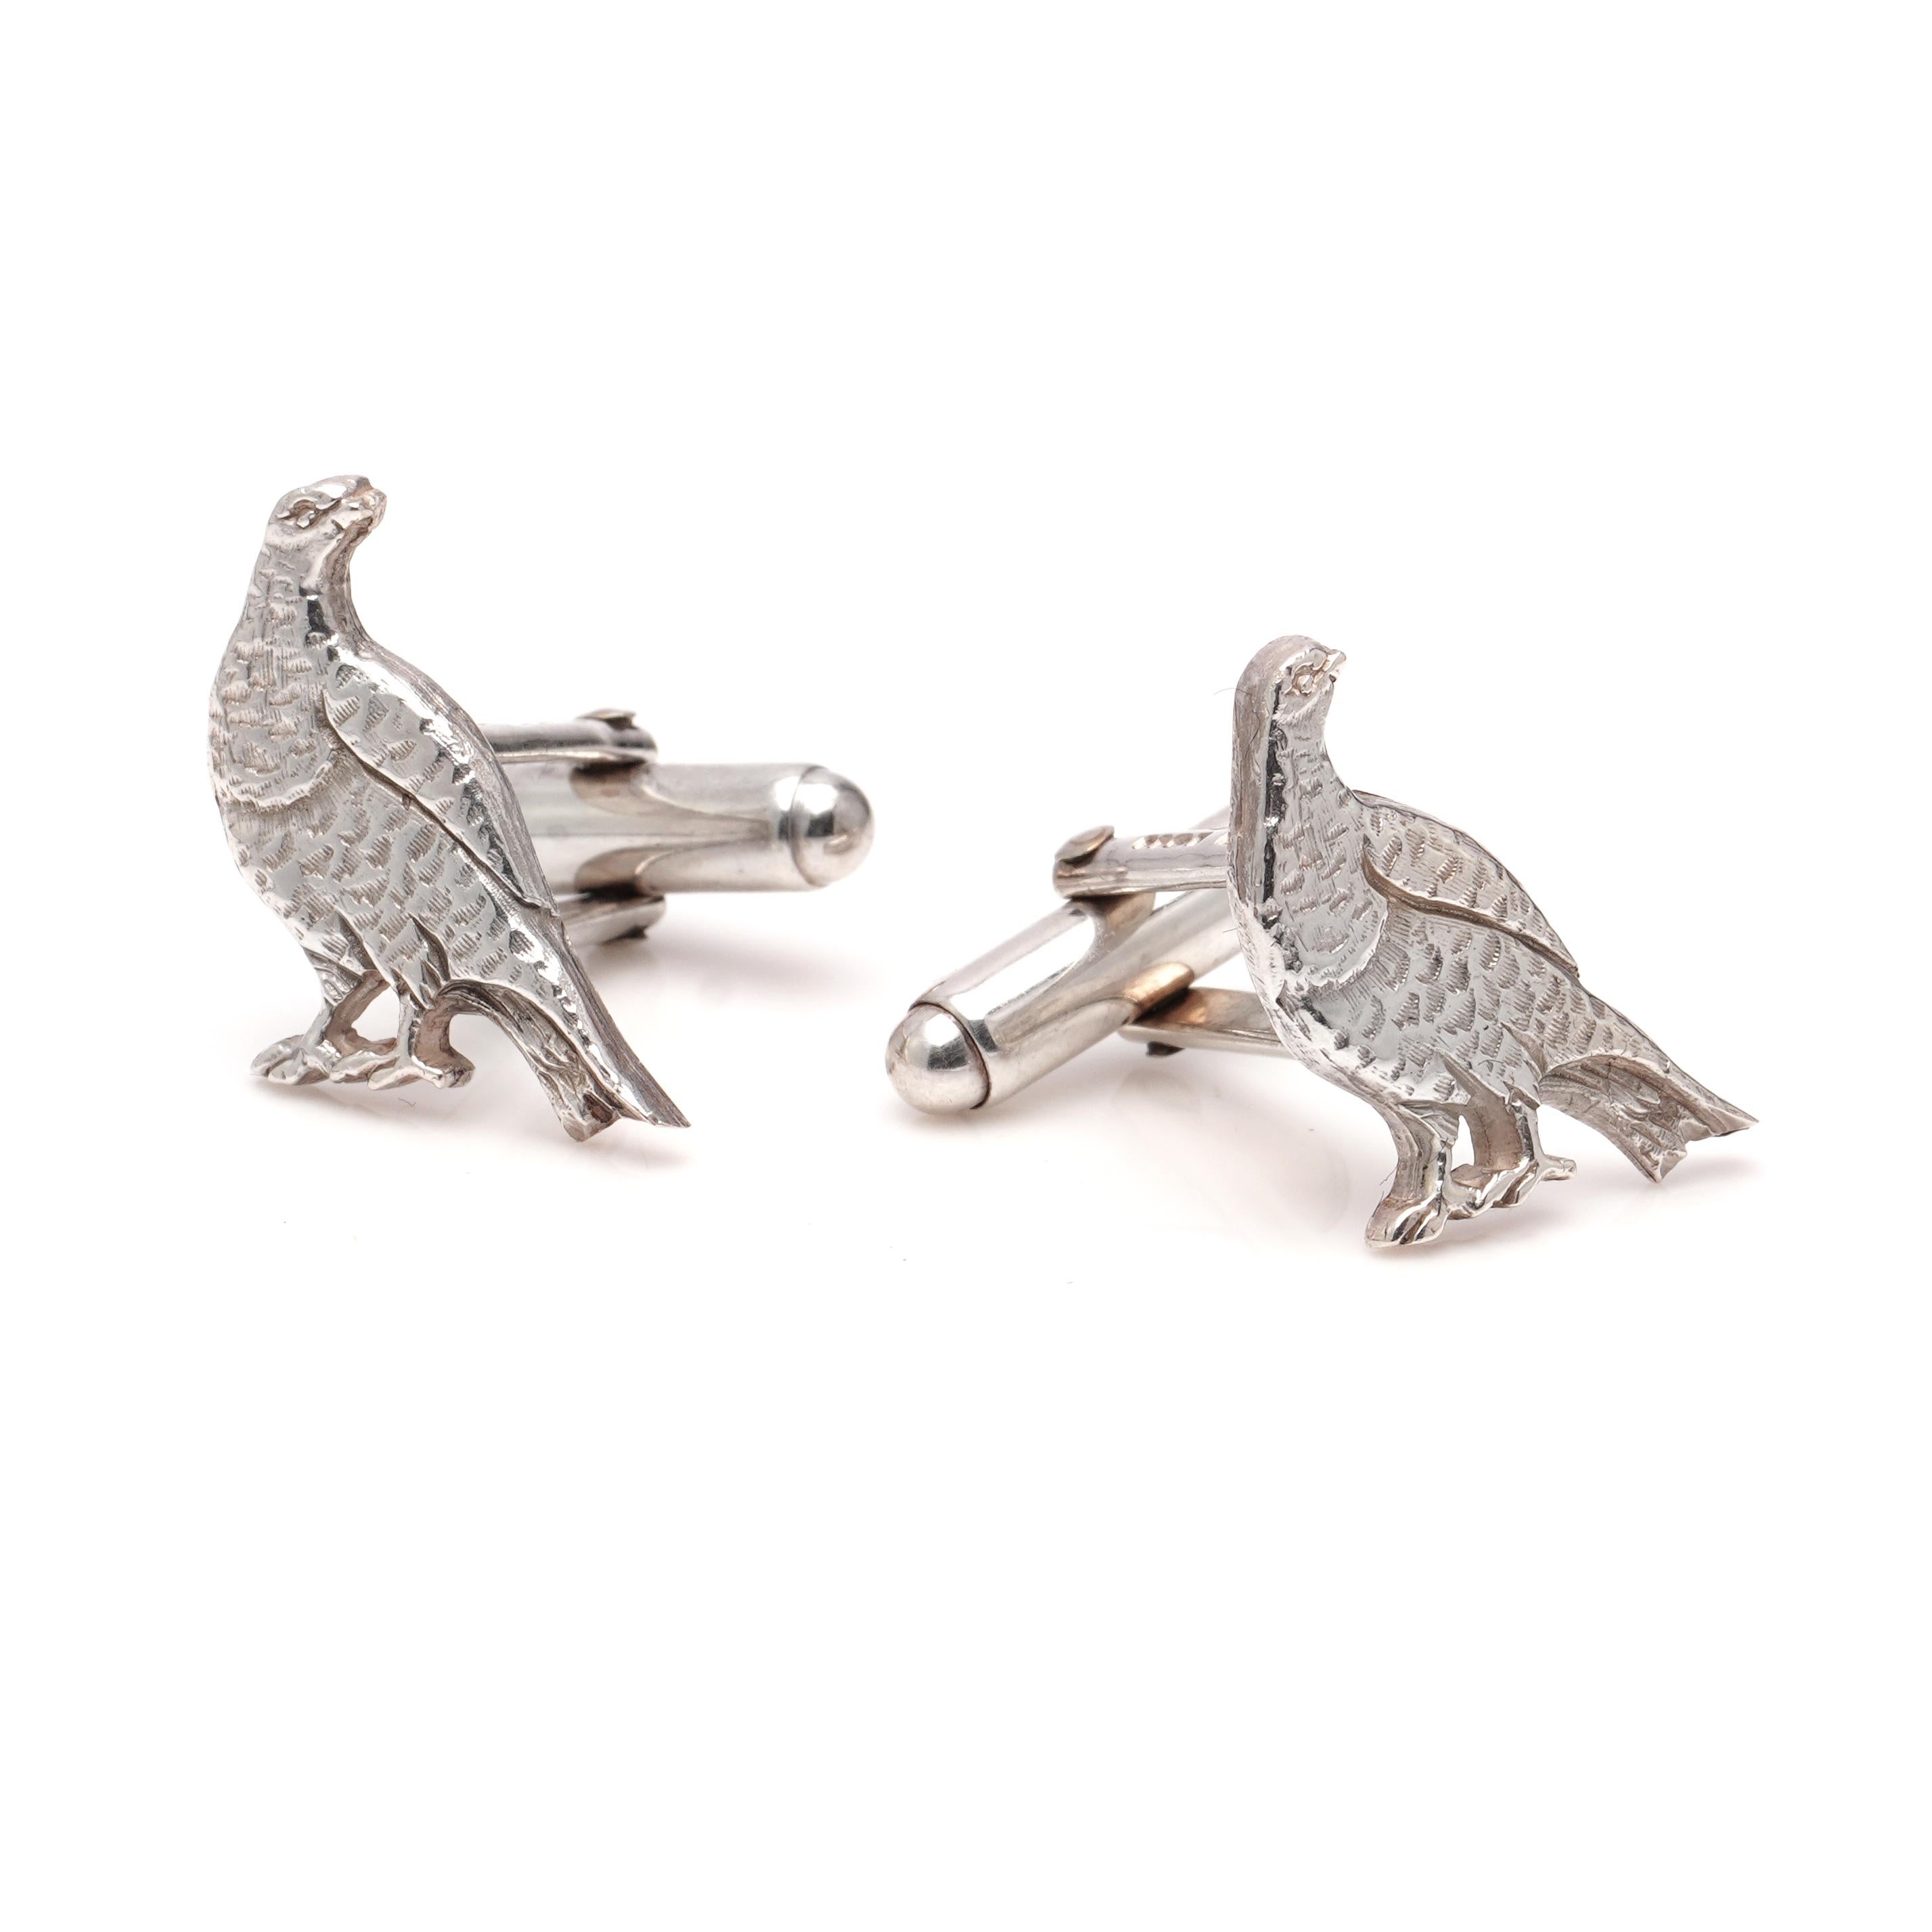 Holland & Holland sterling silver pair of pheasant cufflinks.
Made in England, London, 2009
Fully hallmarked.

Introducing the perfect accessory for the sporting gentleman. These exquisite sterling silver cufflinks are in the shape of two pheasants